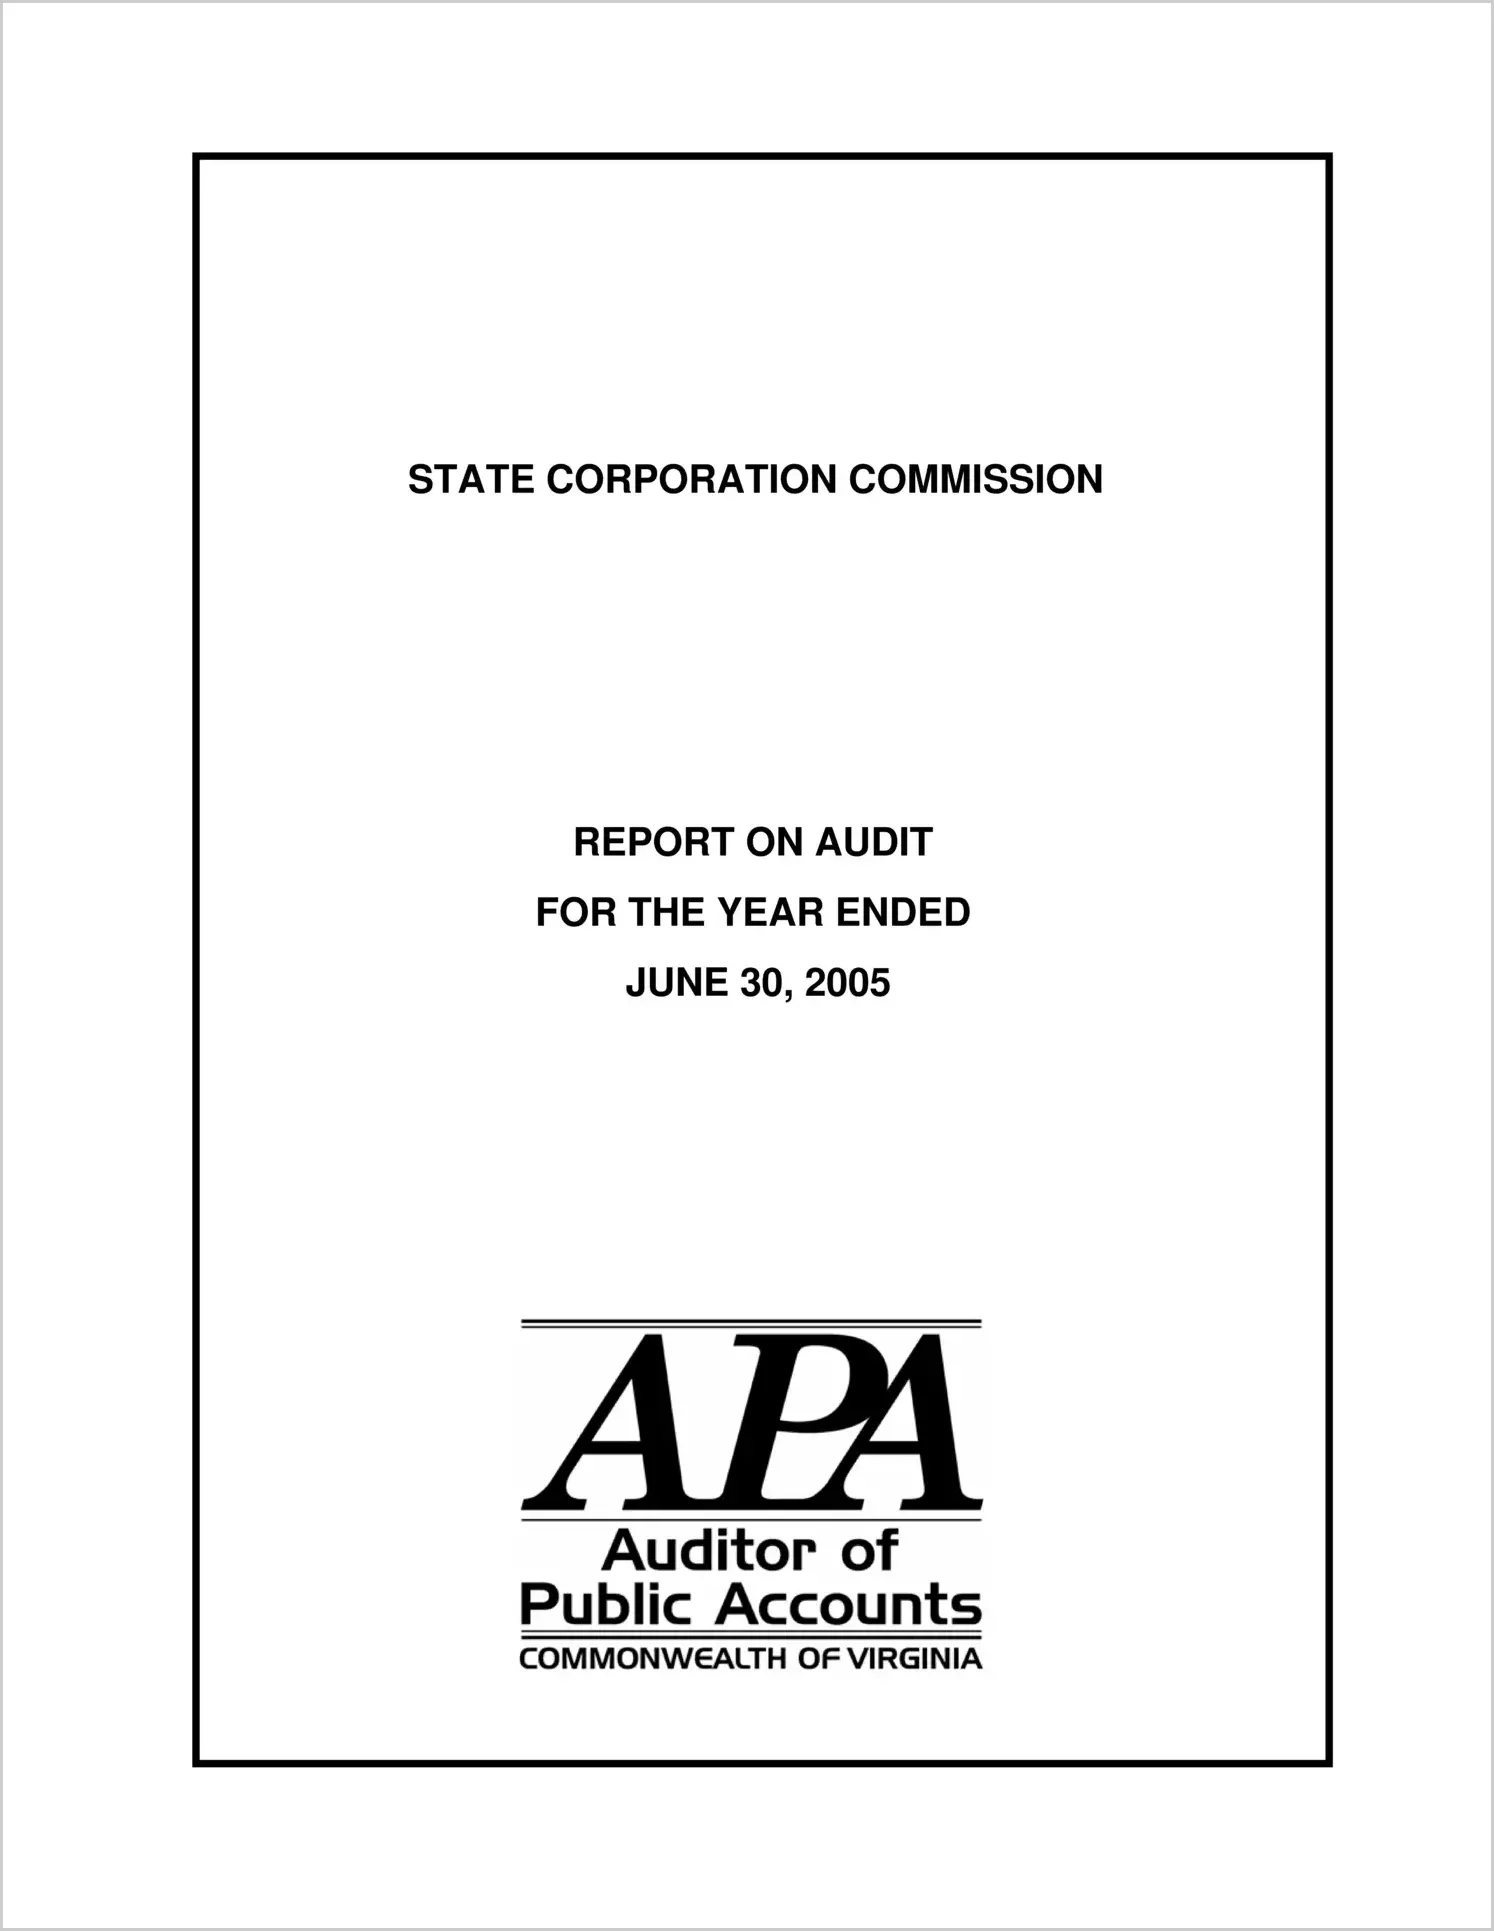 State Corporation Commission for the two-year period ended June 30, 2005